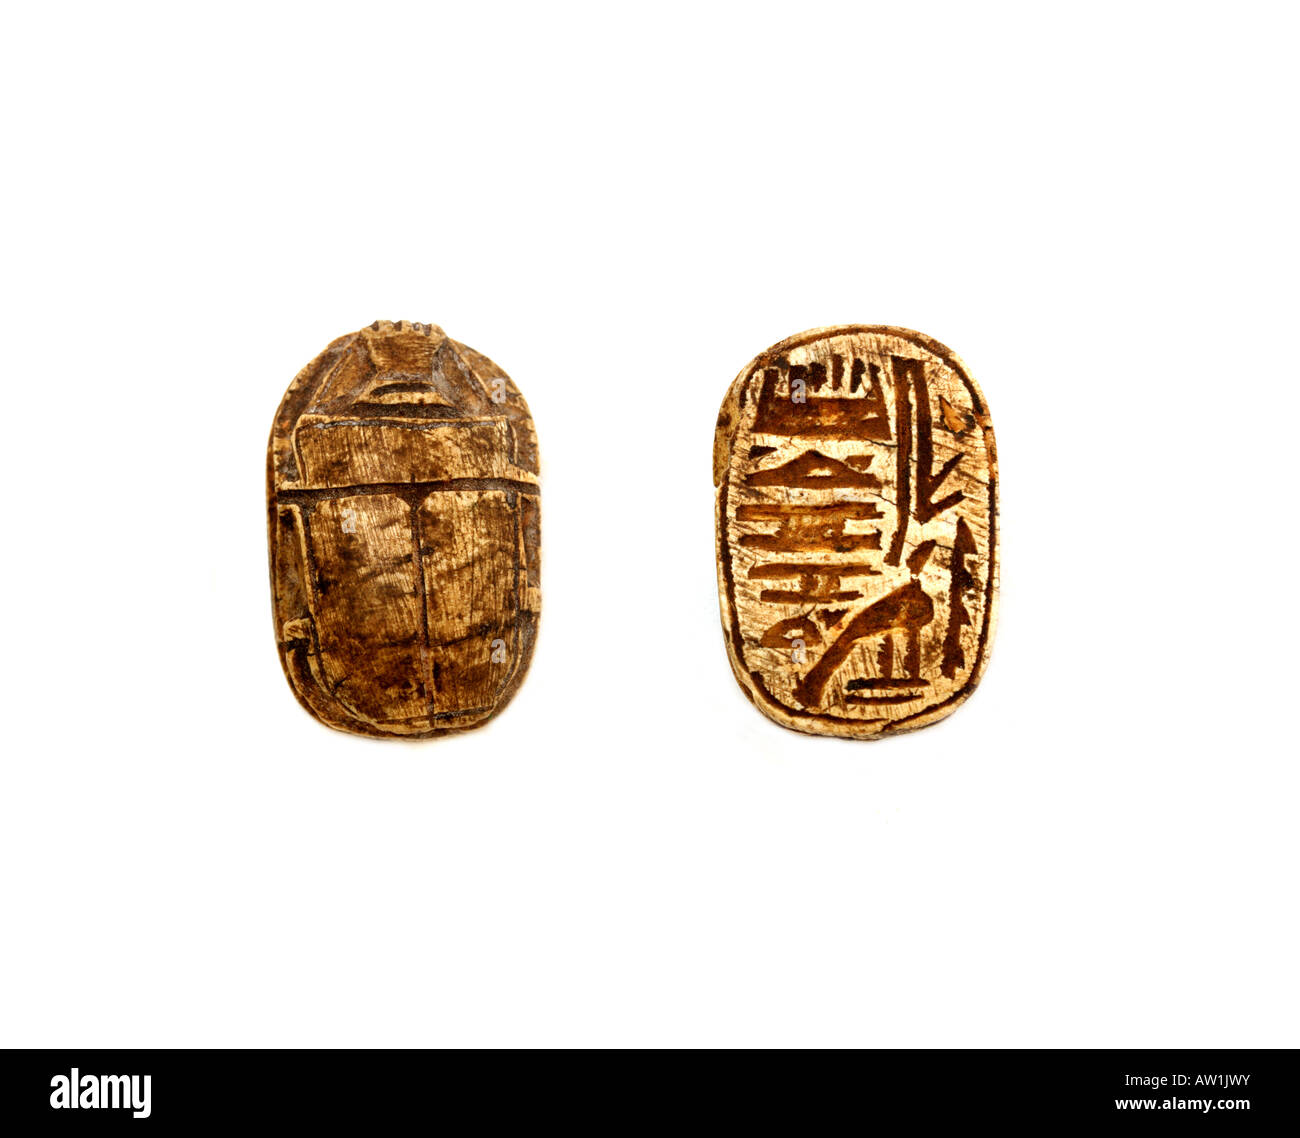 Egyptian Scarab from Sudan Amulet worn by Ancient Egyptian to represent God Khepri Stock Photo